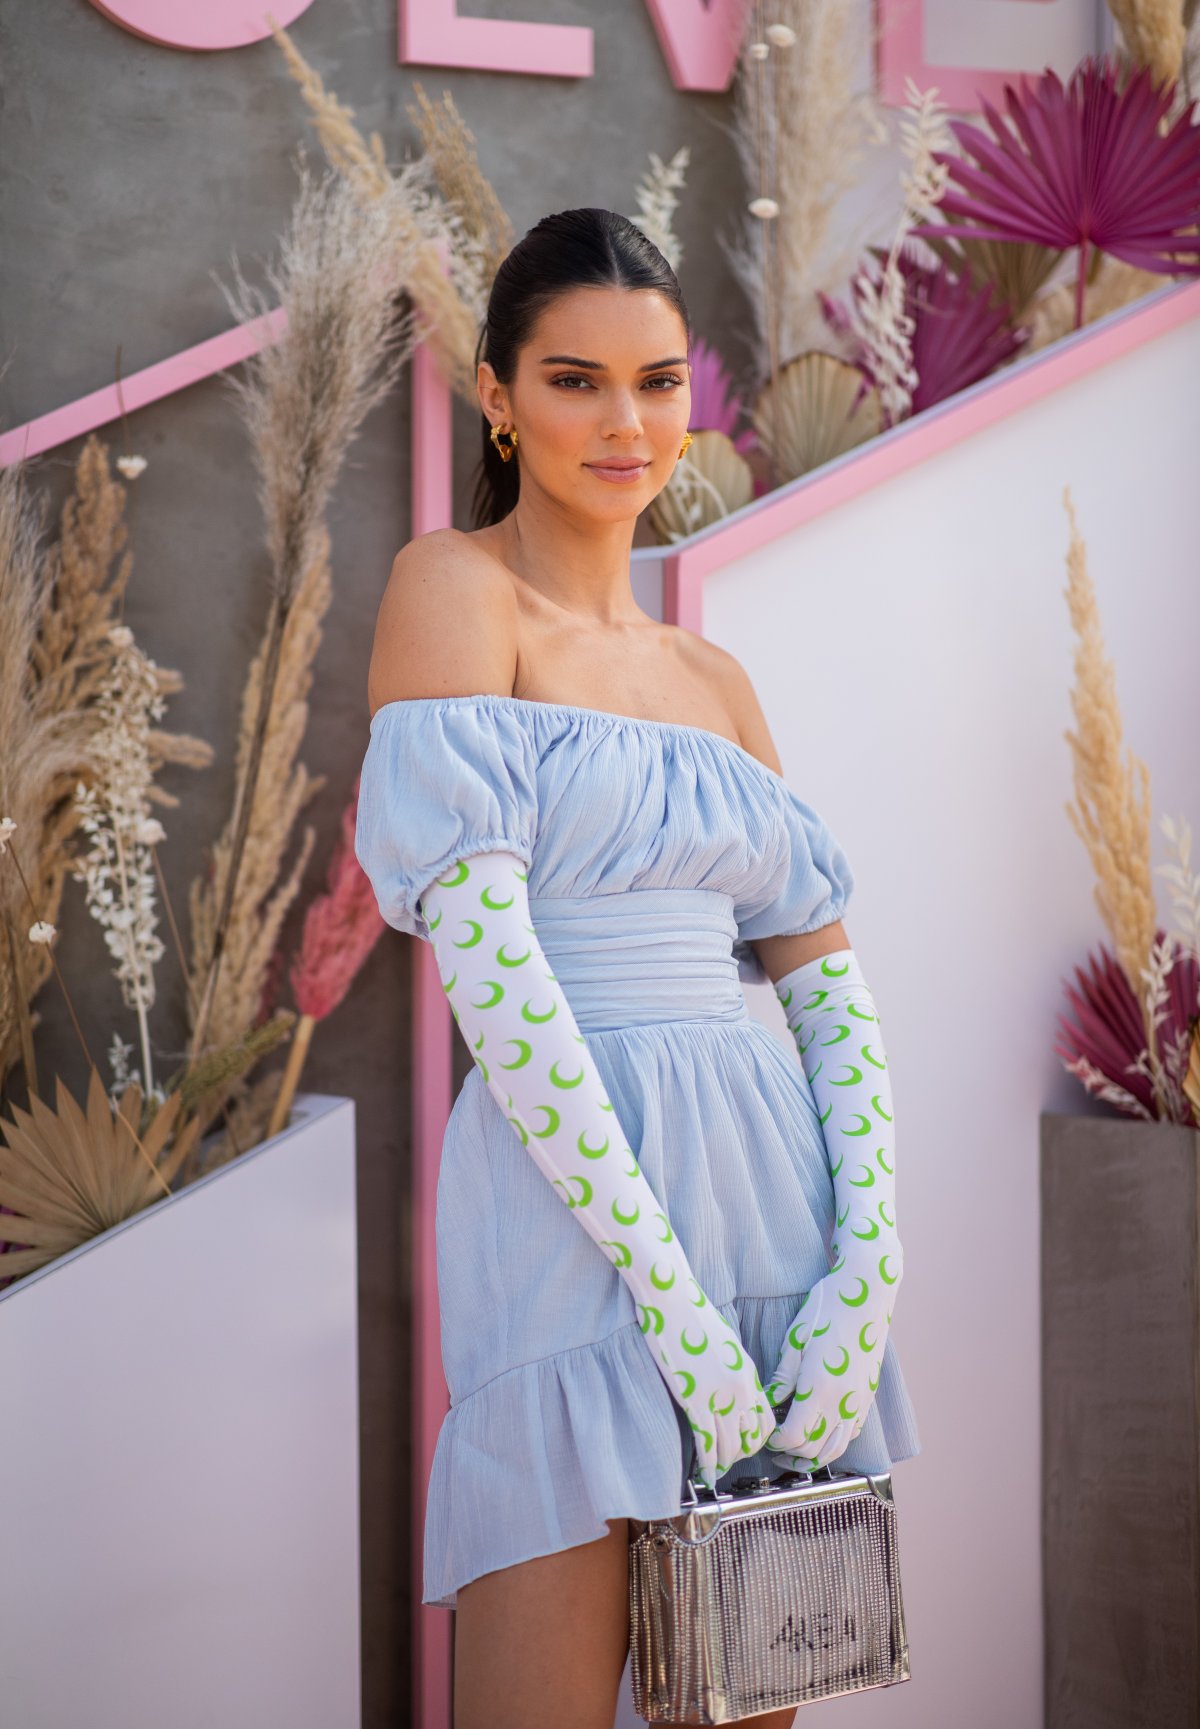 Coachella 2019: The best and worst celebrity outfits - National ...